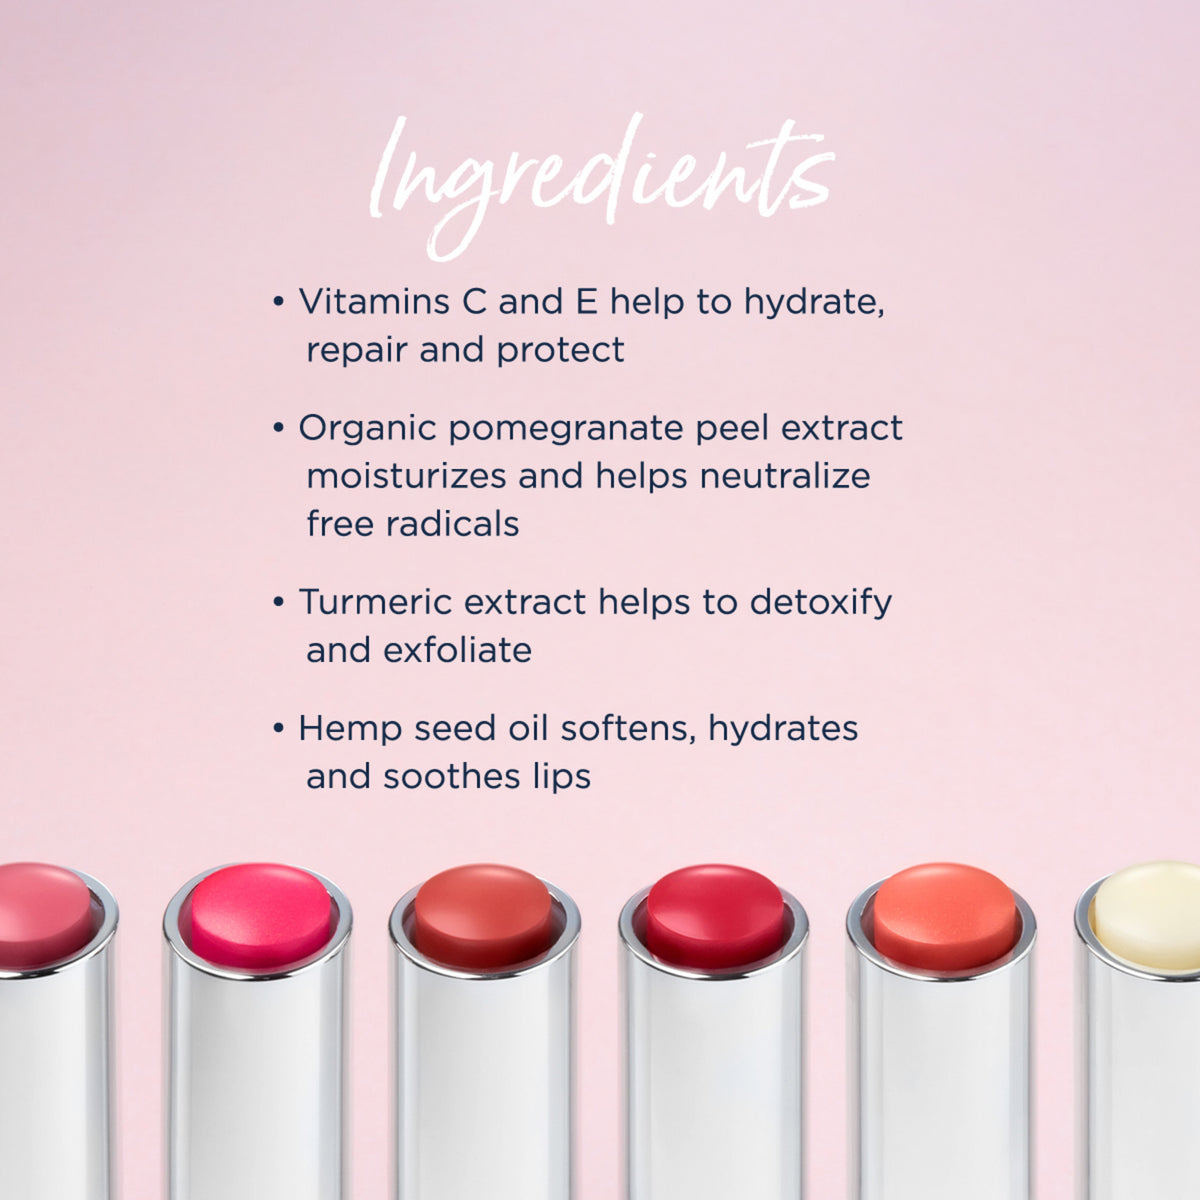 Lune+Aster Tinted Lip Balm . This product is in the color pink